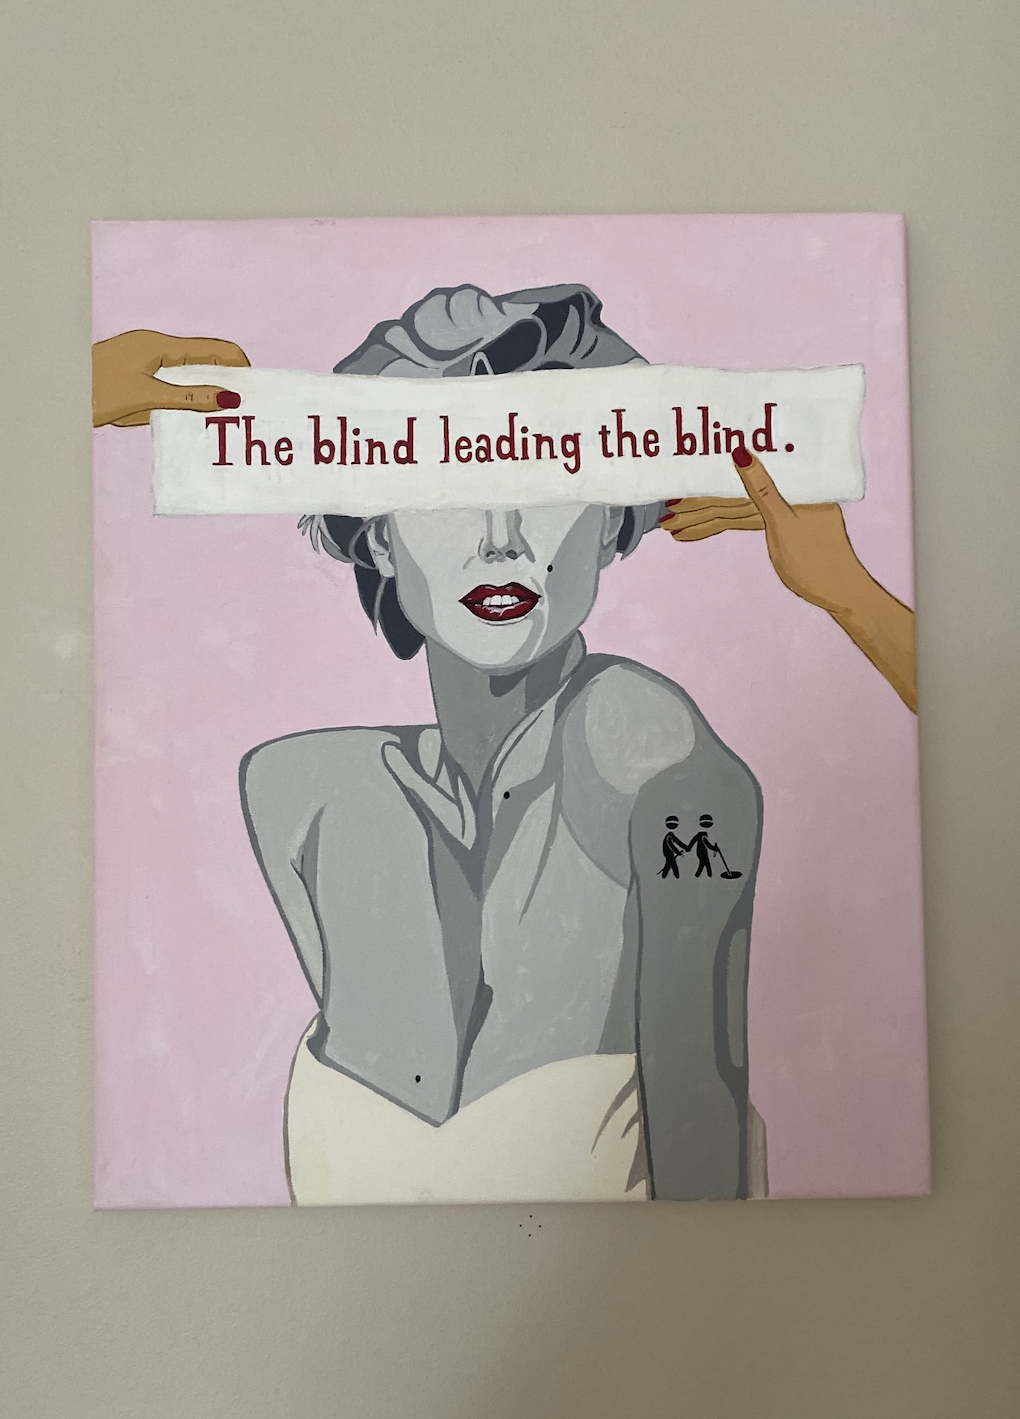 The blind leading queen